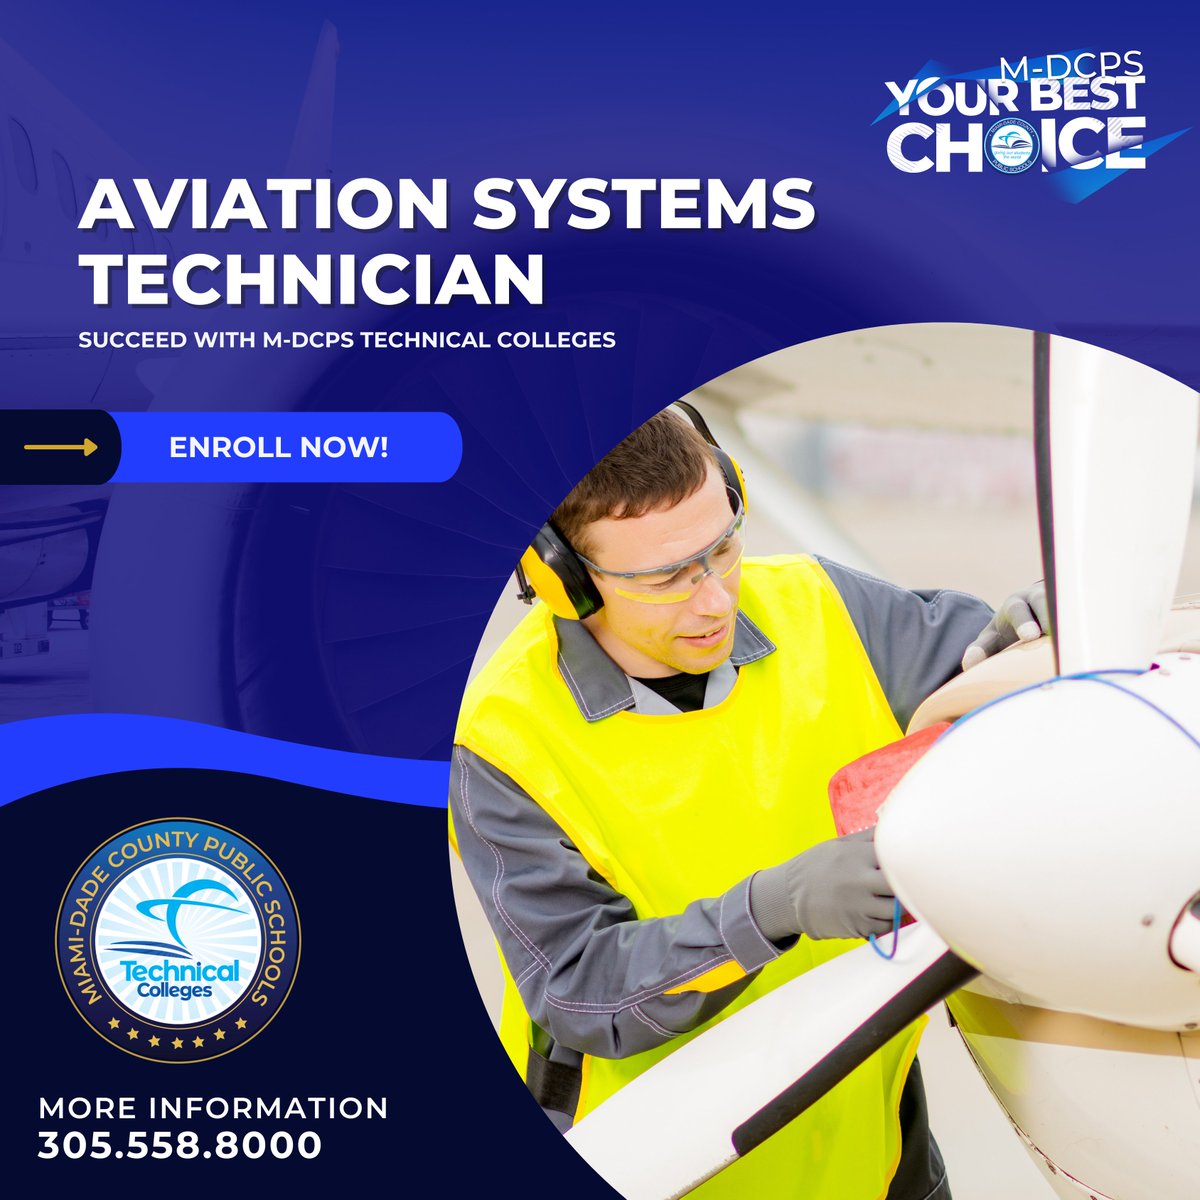 Join @Baker_Aviation and soar into a rewarding career as an Aviation Systems Technician! Get hands-on training from industry pros and launch your journey in just 18 months. ✈️🔧 #YourBestChoiceMDCPS 📞(305) 558-8000 💻 CareerInAYear.com